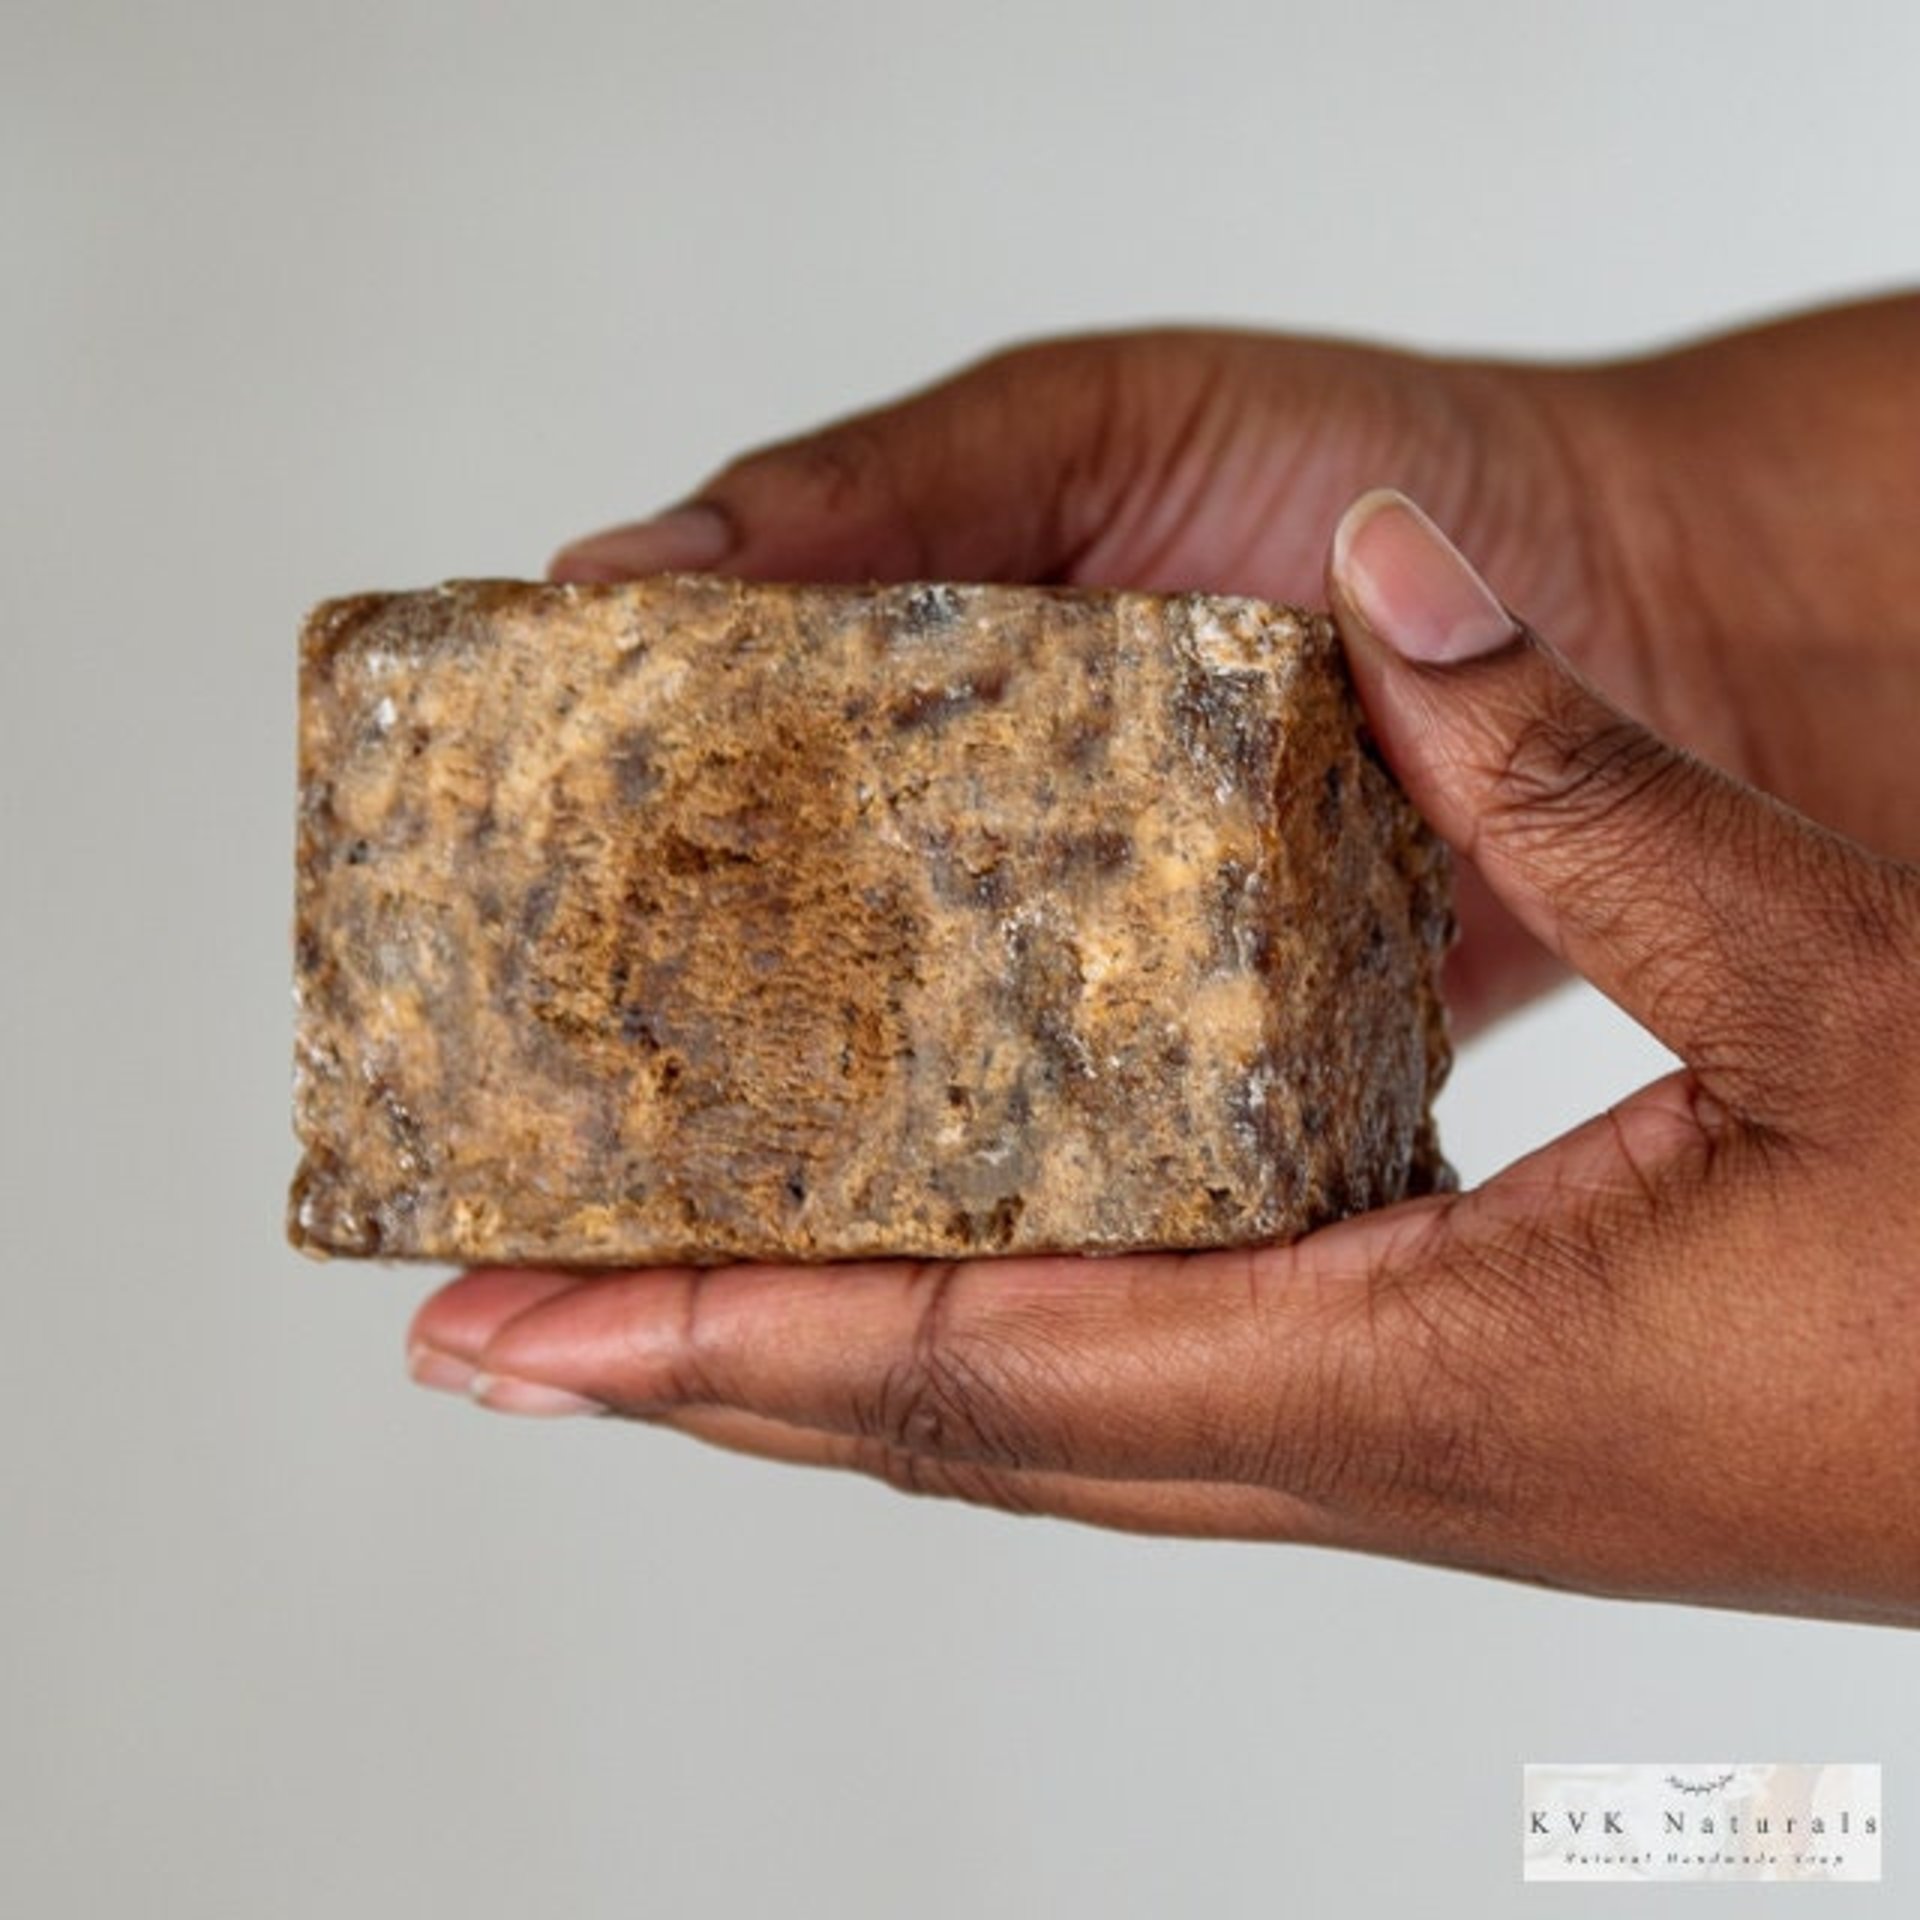 Handmade African Black Soap - Raw Ingredients, Cleansing Bar, Natural Beauty